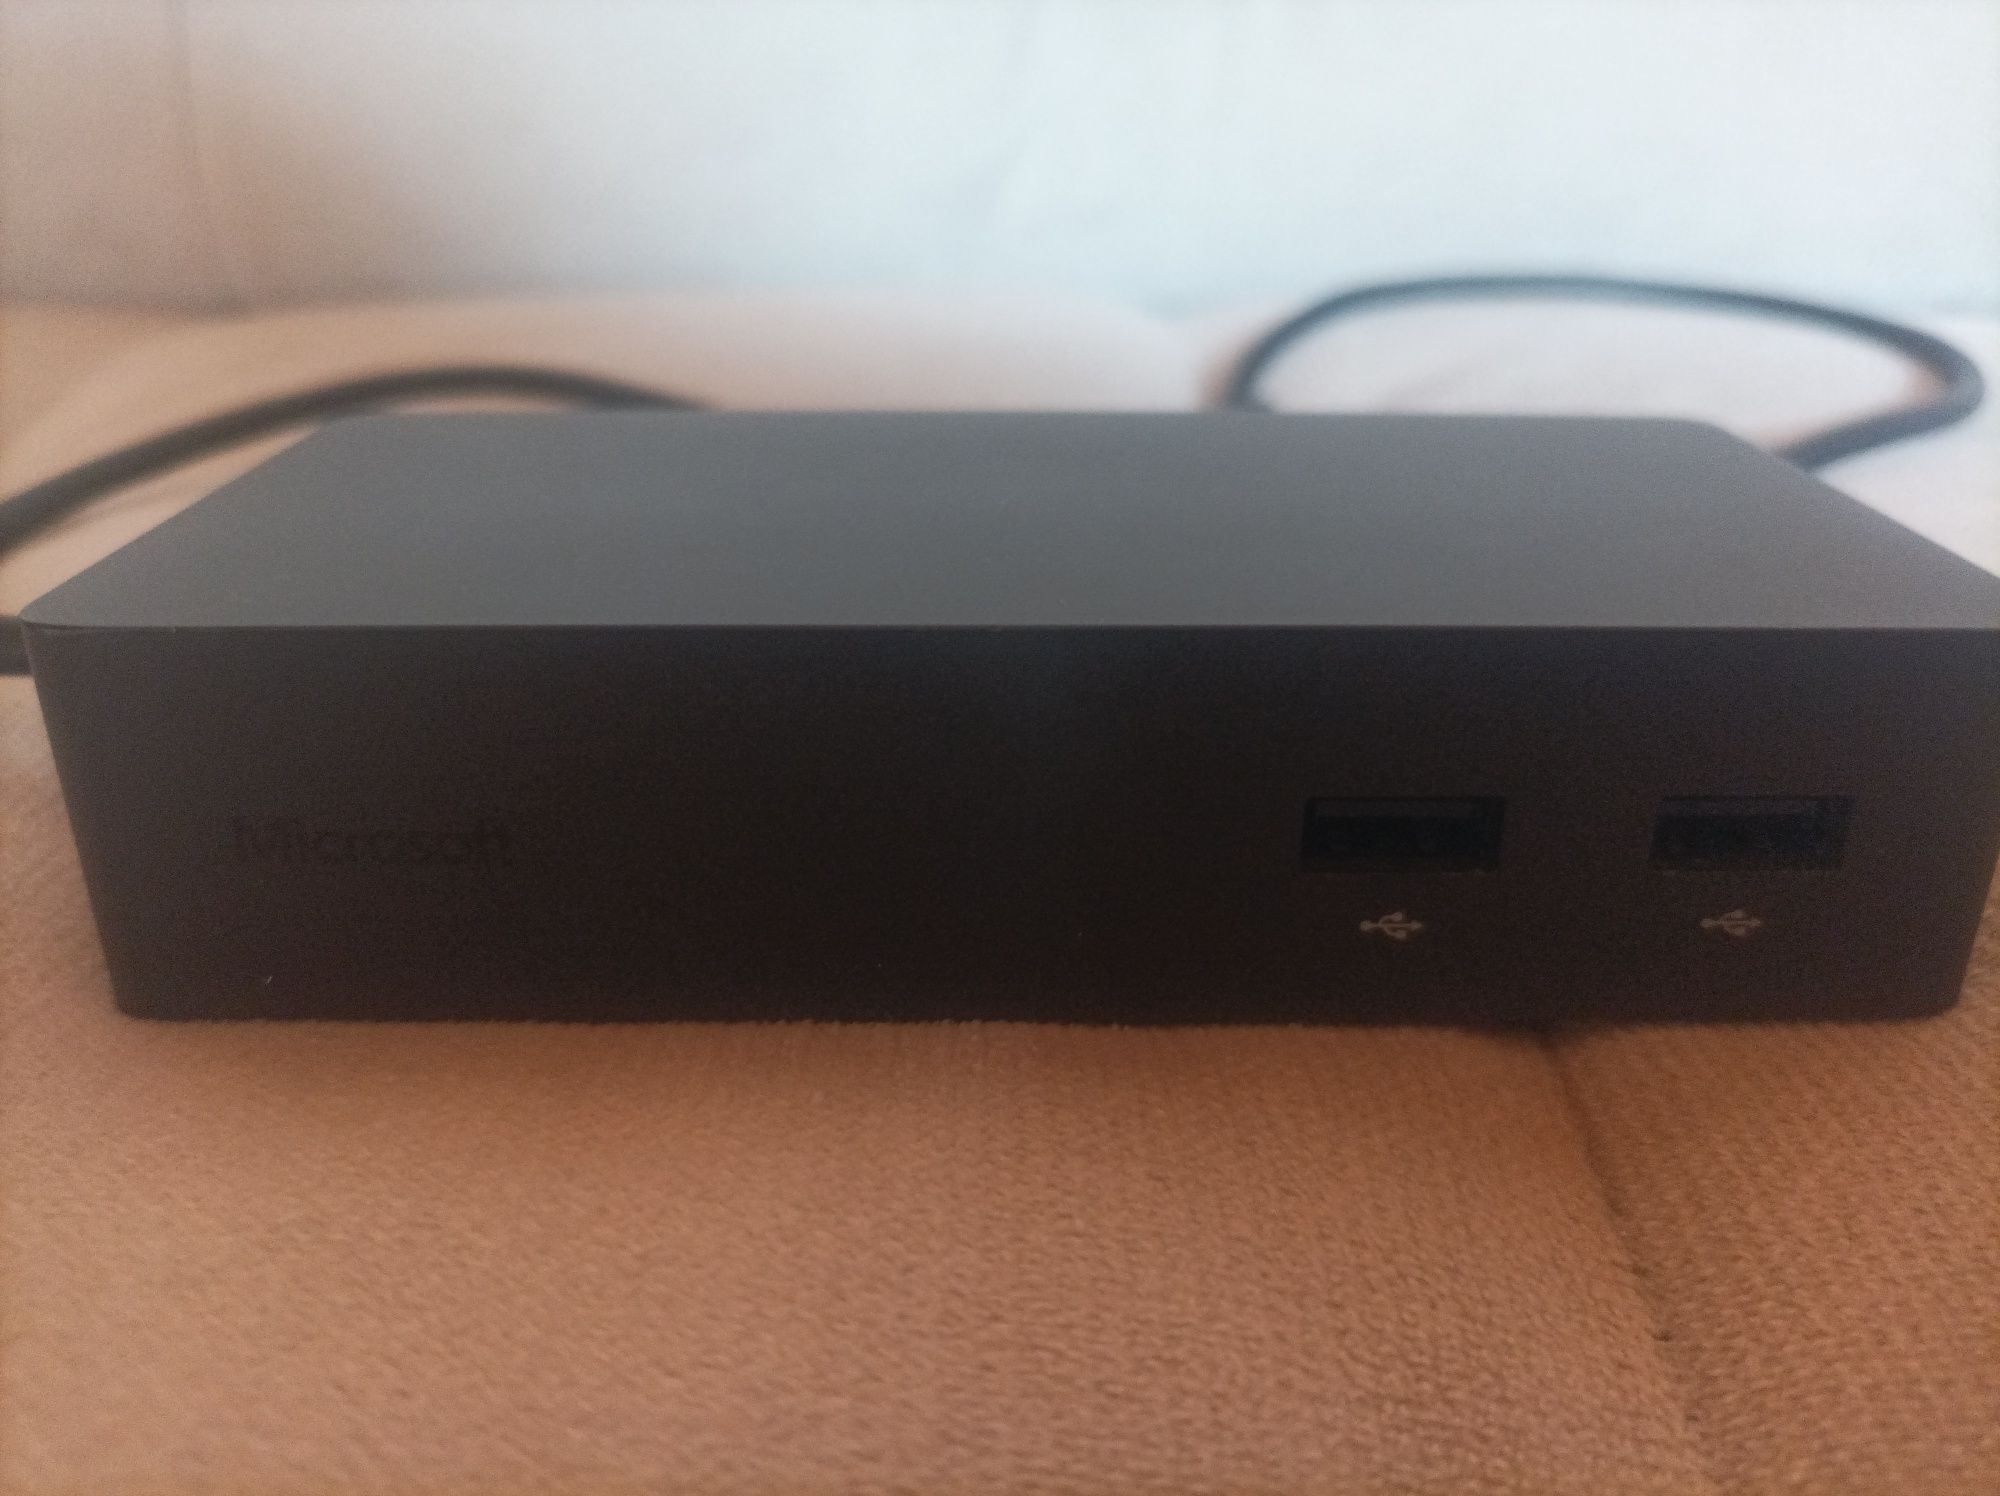 Microsoft surface dock + charger